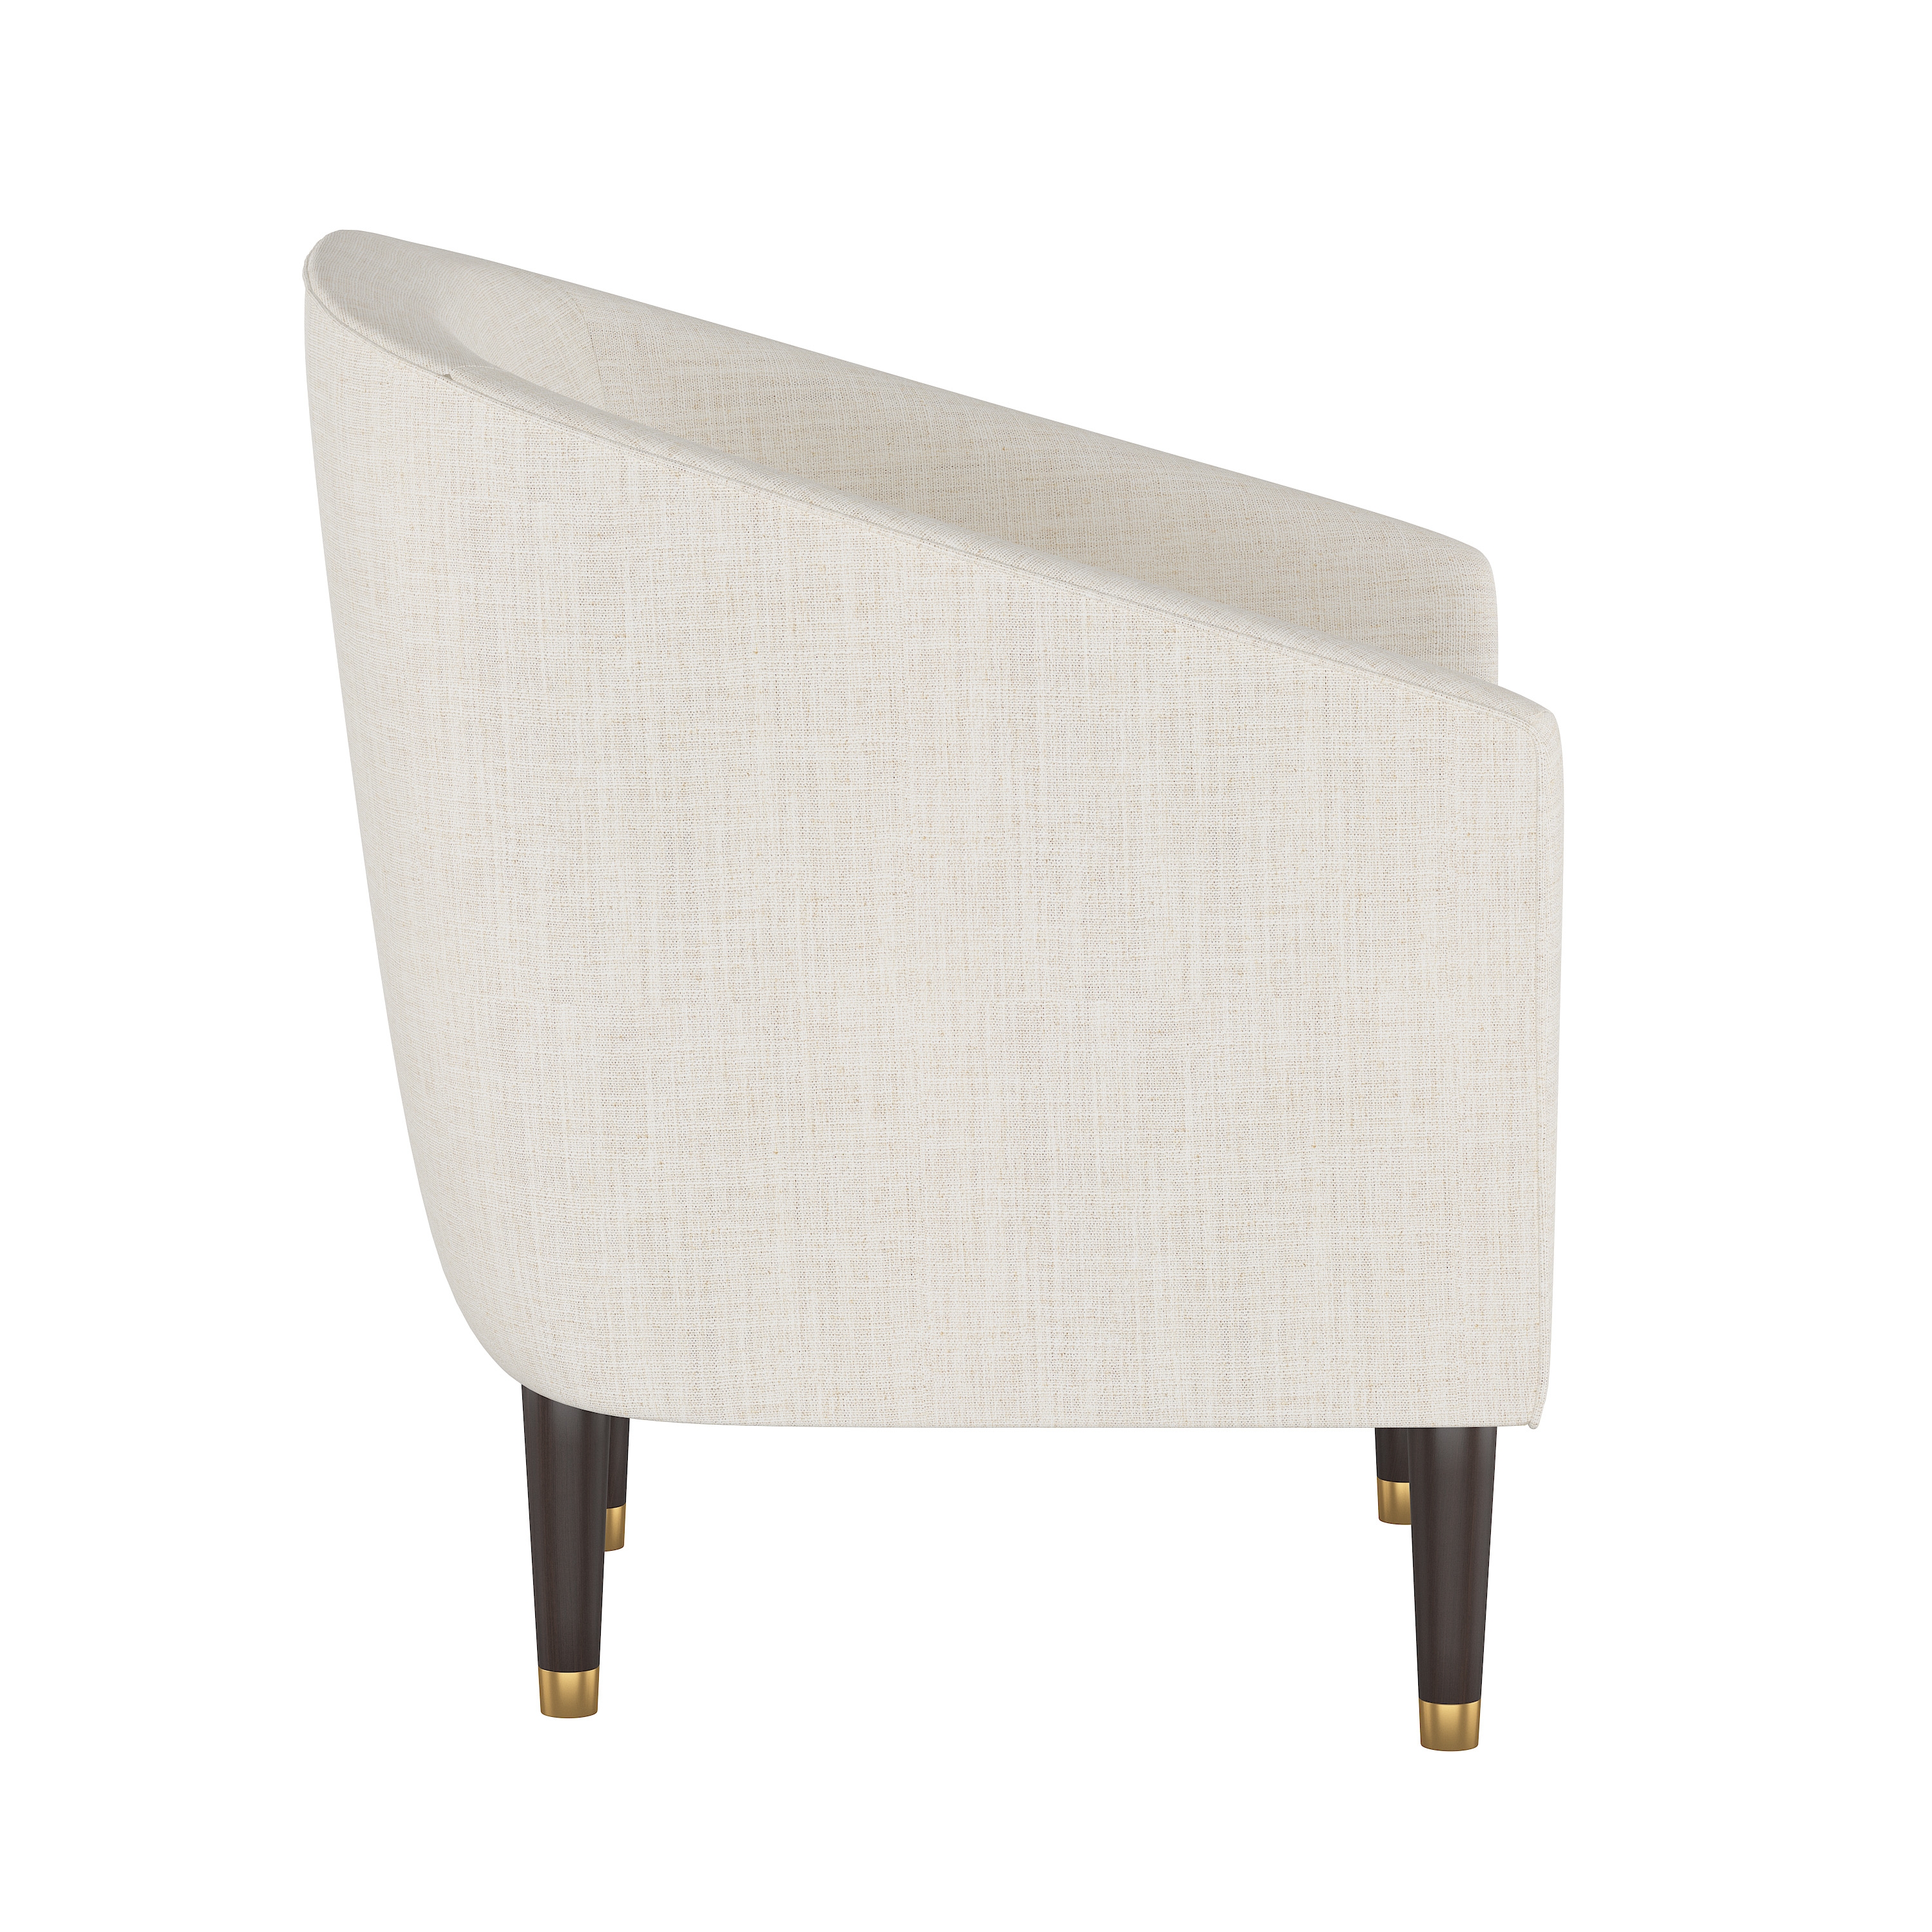 Irving Park Chair in Linen Talc - Image 2